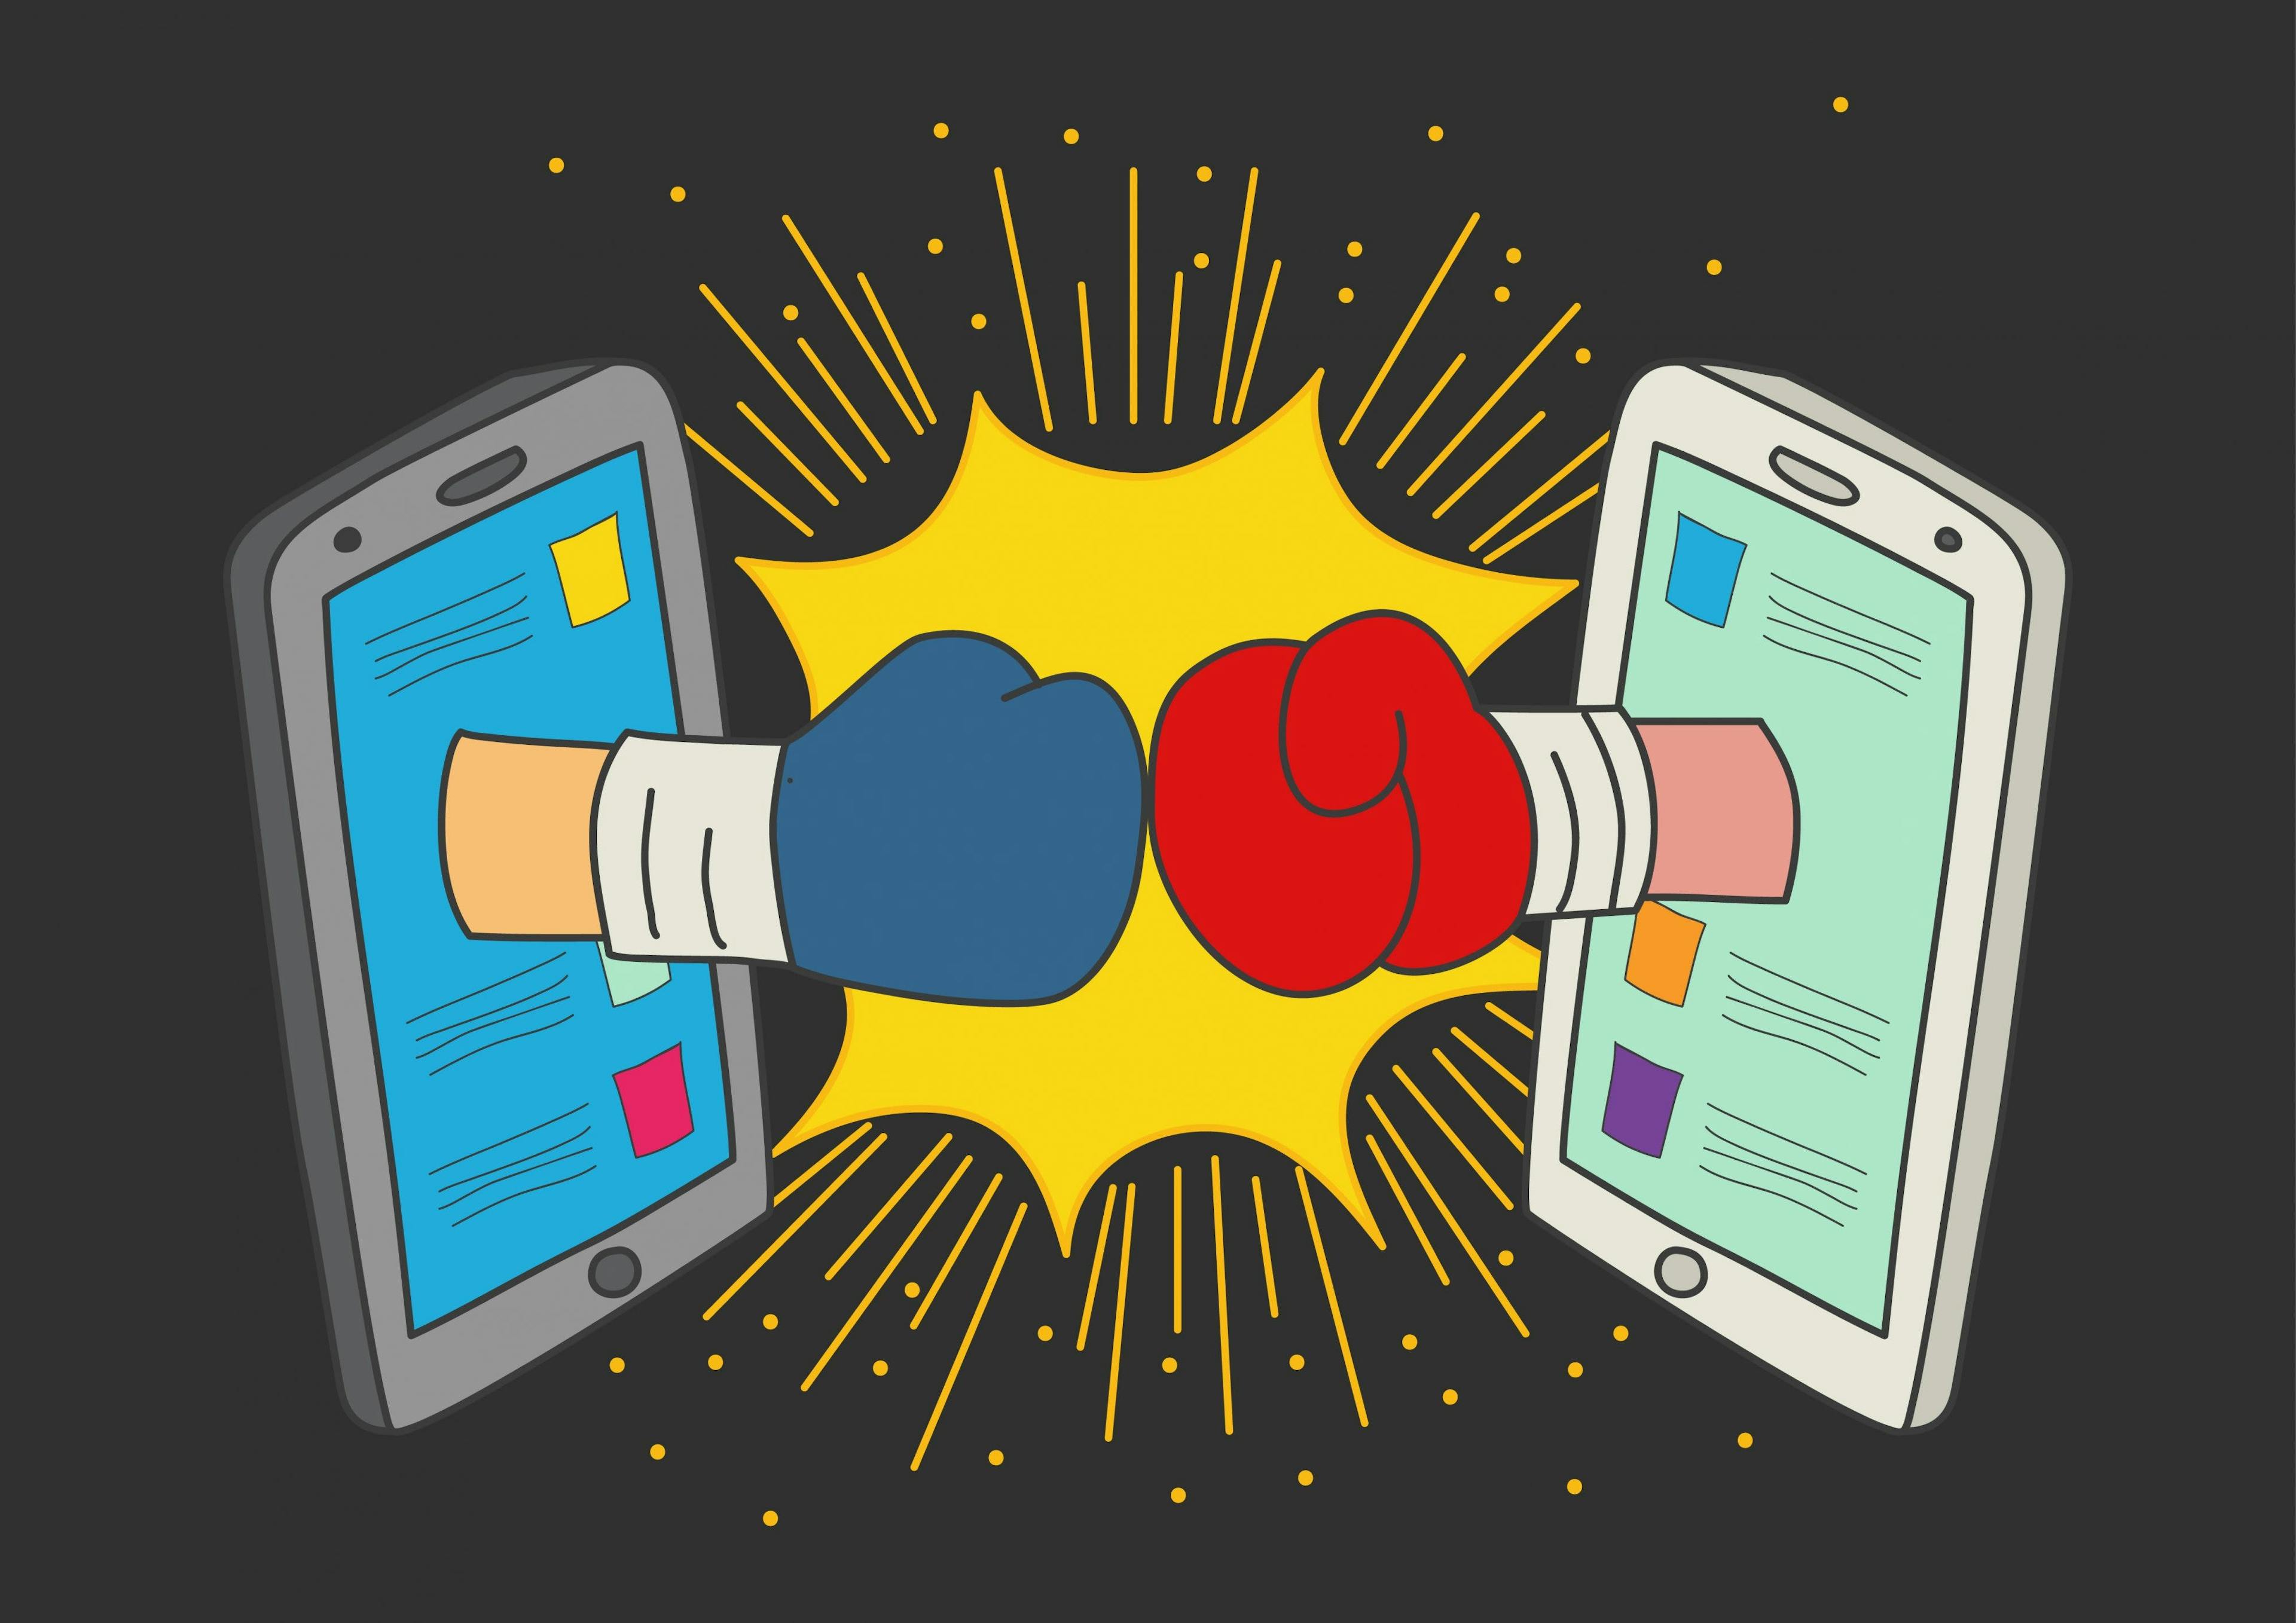 two boxing gloves coming out of opposing smart phone screens, punching each other